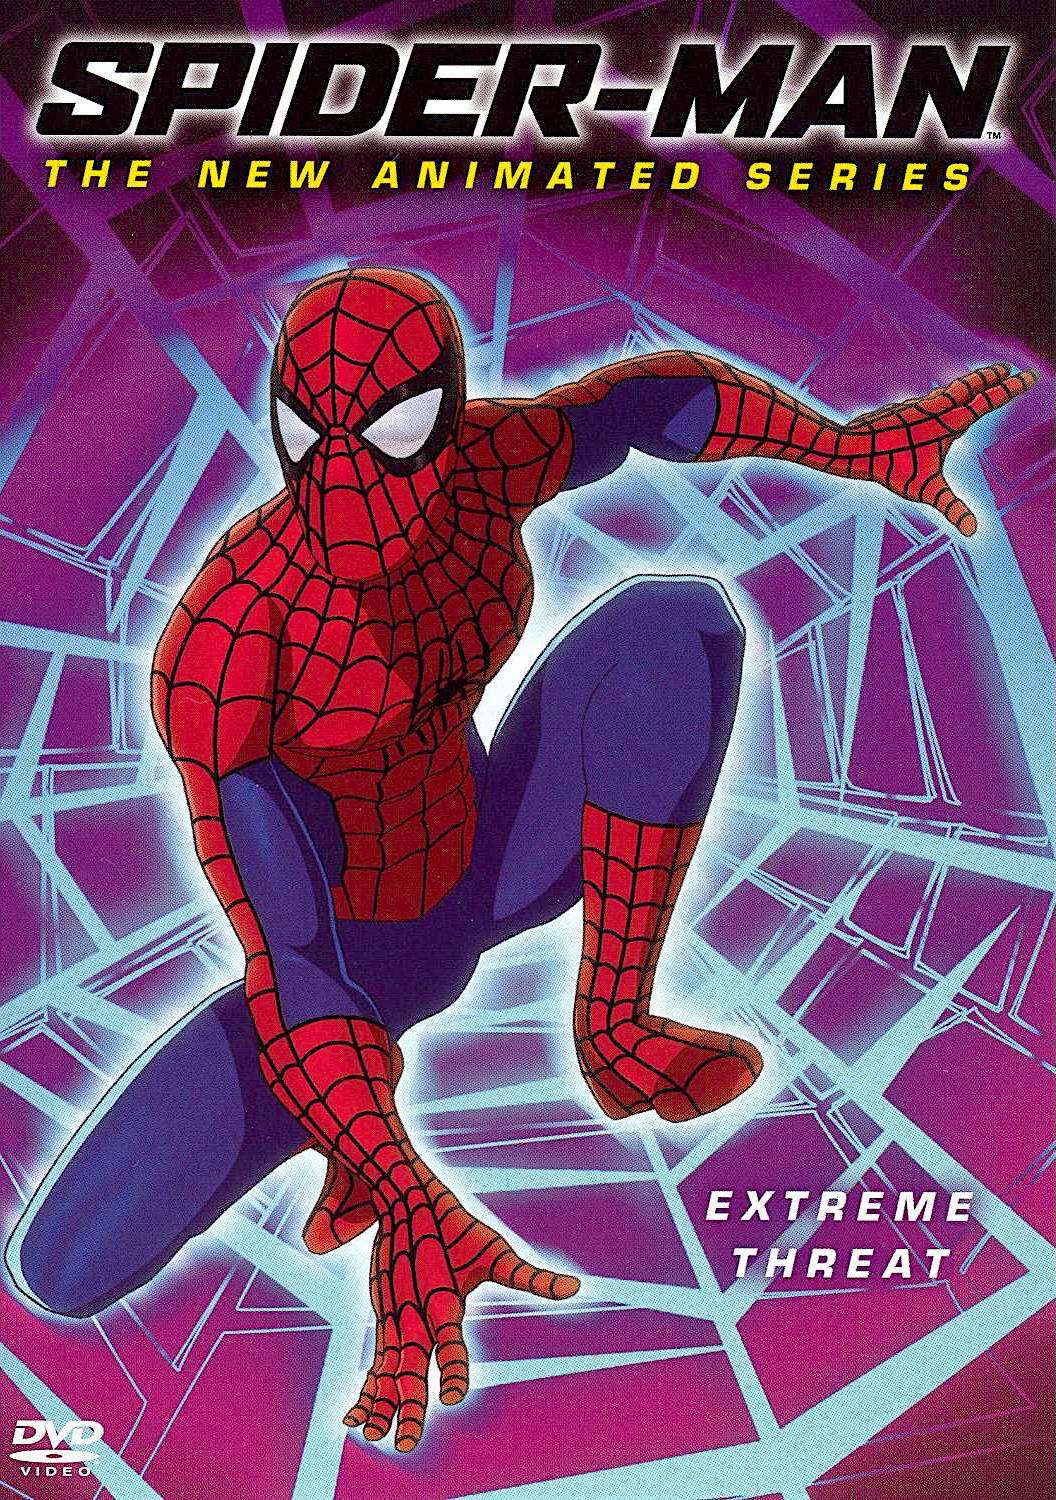 Spider-Man The New Animated Series (2003)